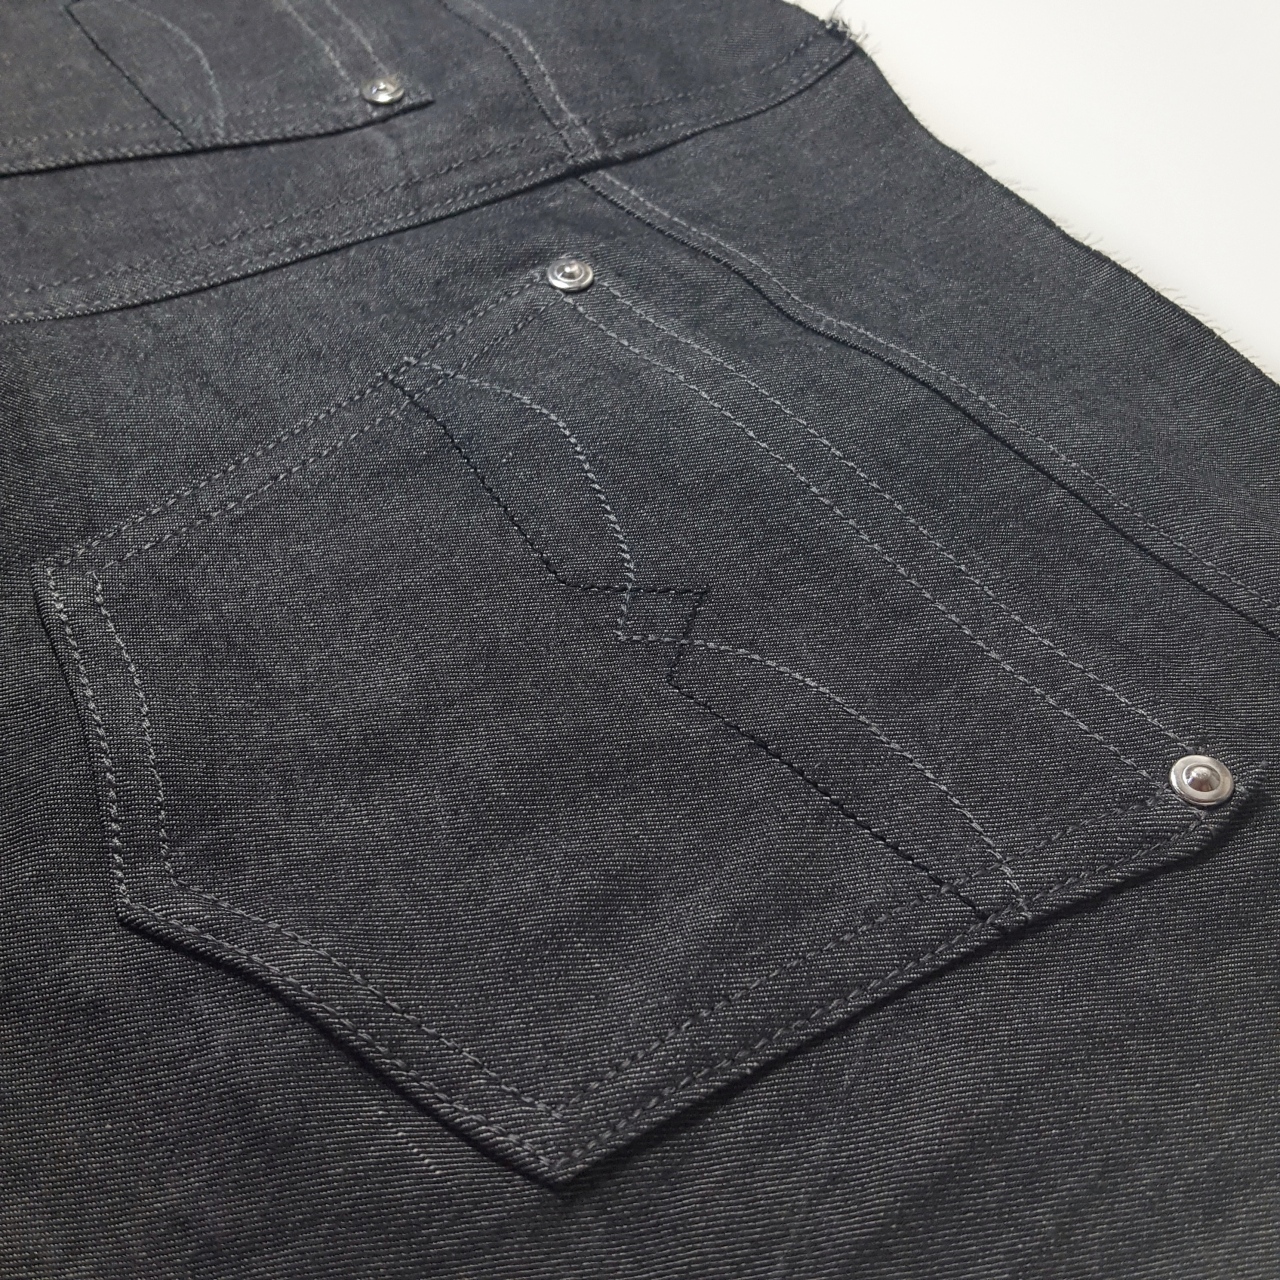 jeans pocket sewing